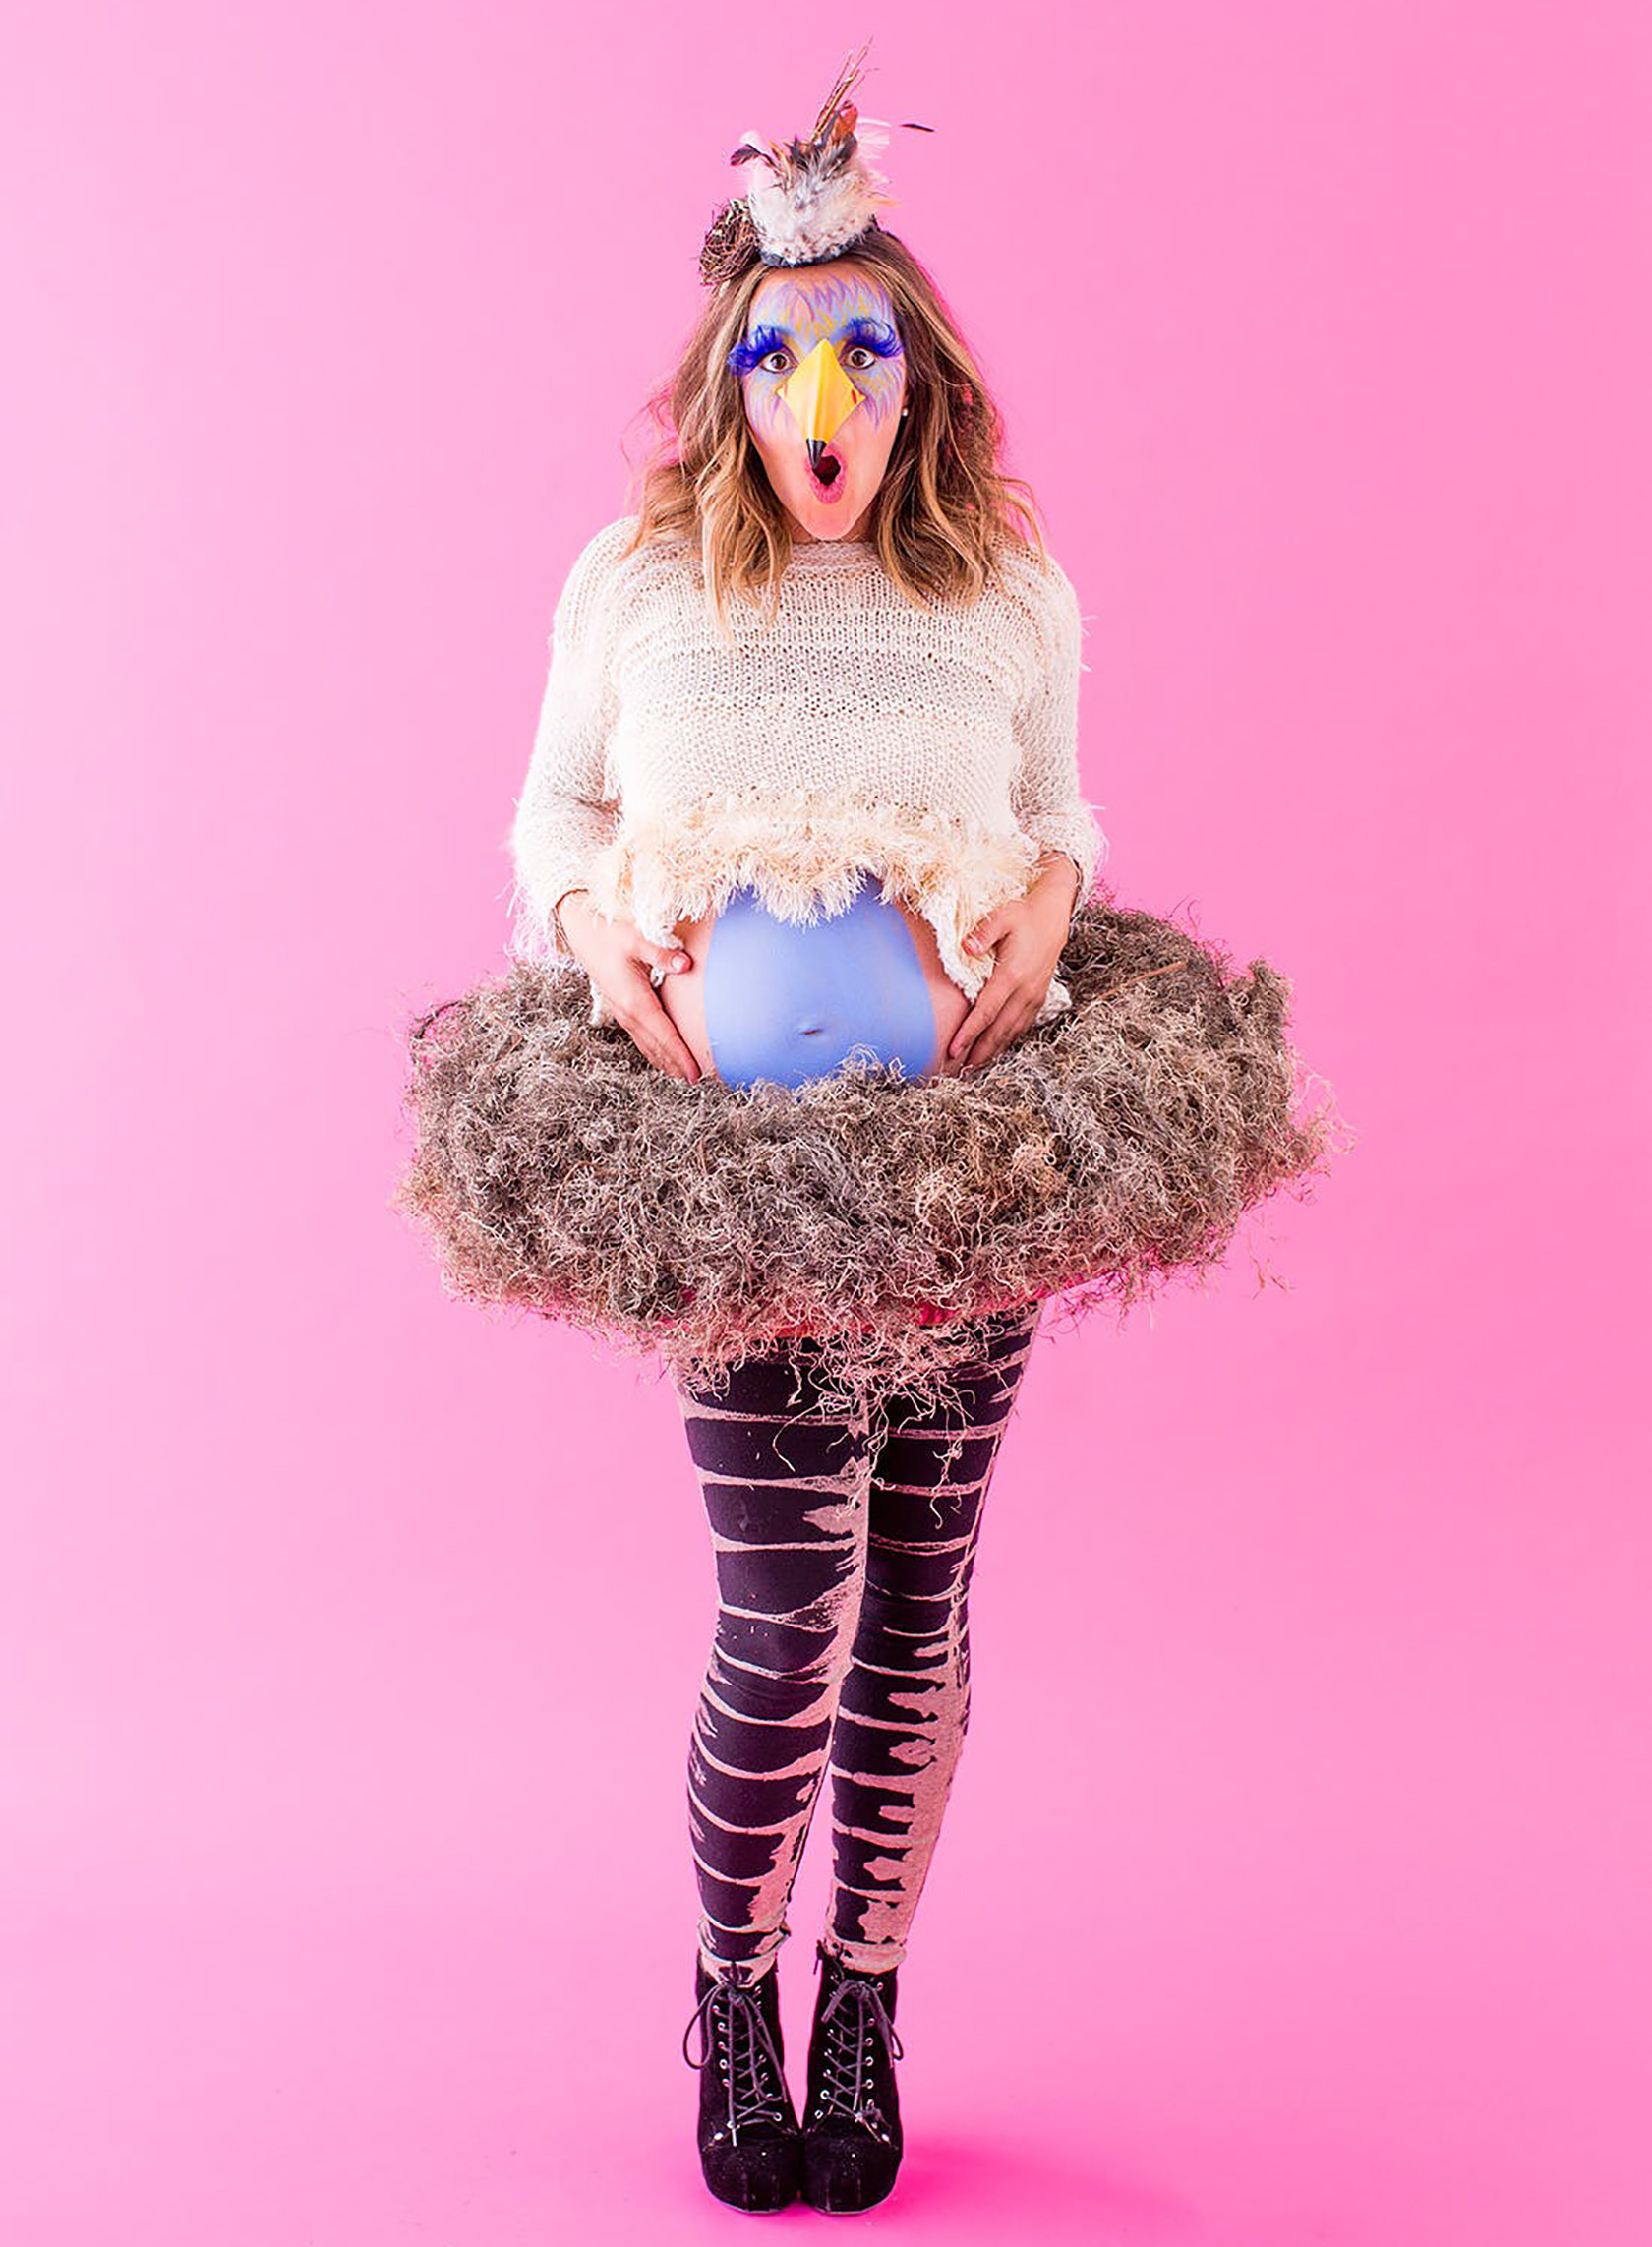 Scary DIY Halloween Costumes
 Six DIY Feather Costumes to Fly Into Halloween